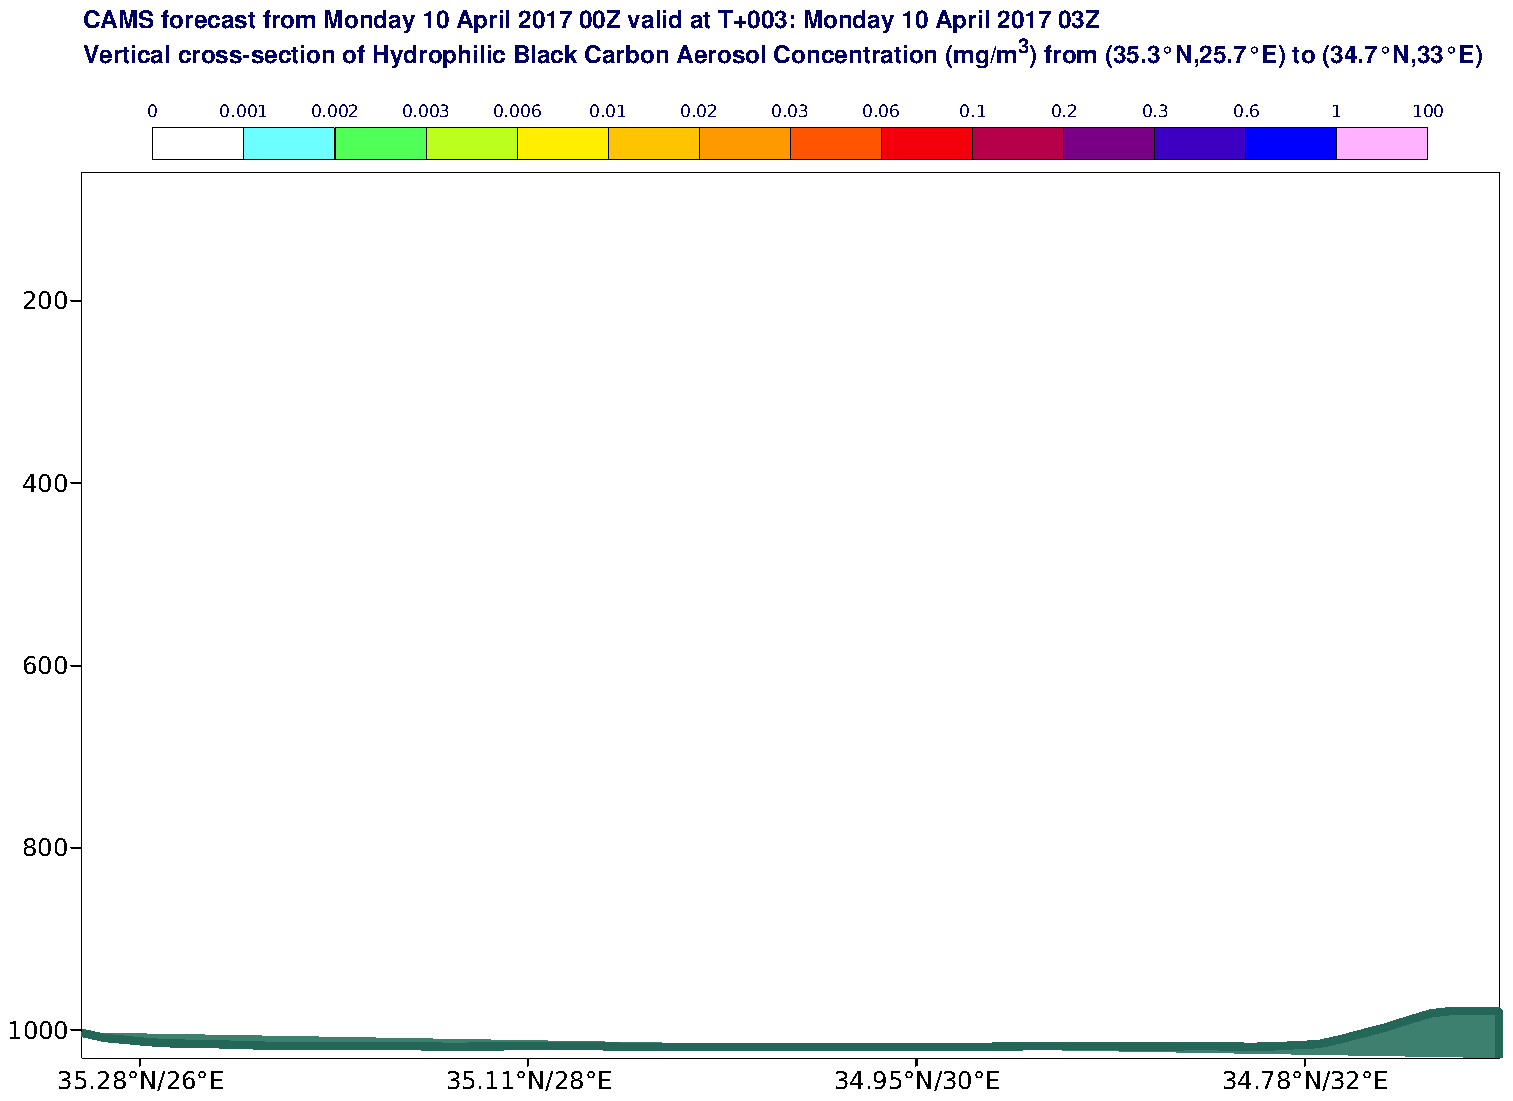 Vertical cross-section of Hydrophilic Black Carbon Aerosol Concentration (mg/m3) valid at T3 - 2017-04-10 03:00